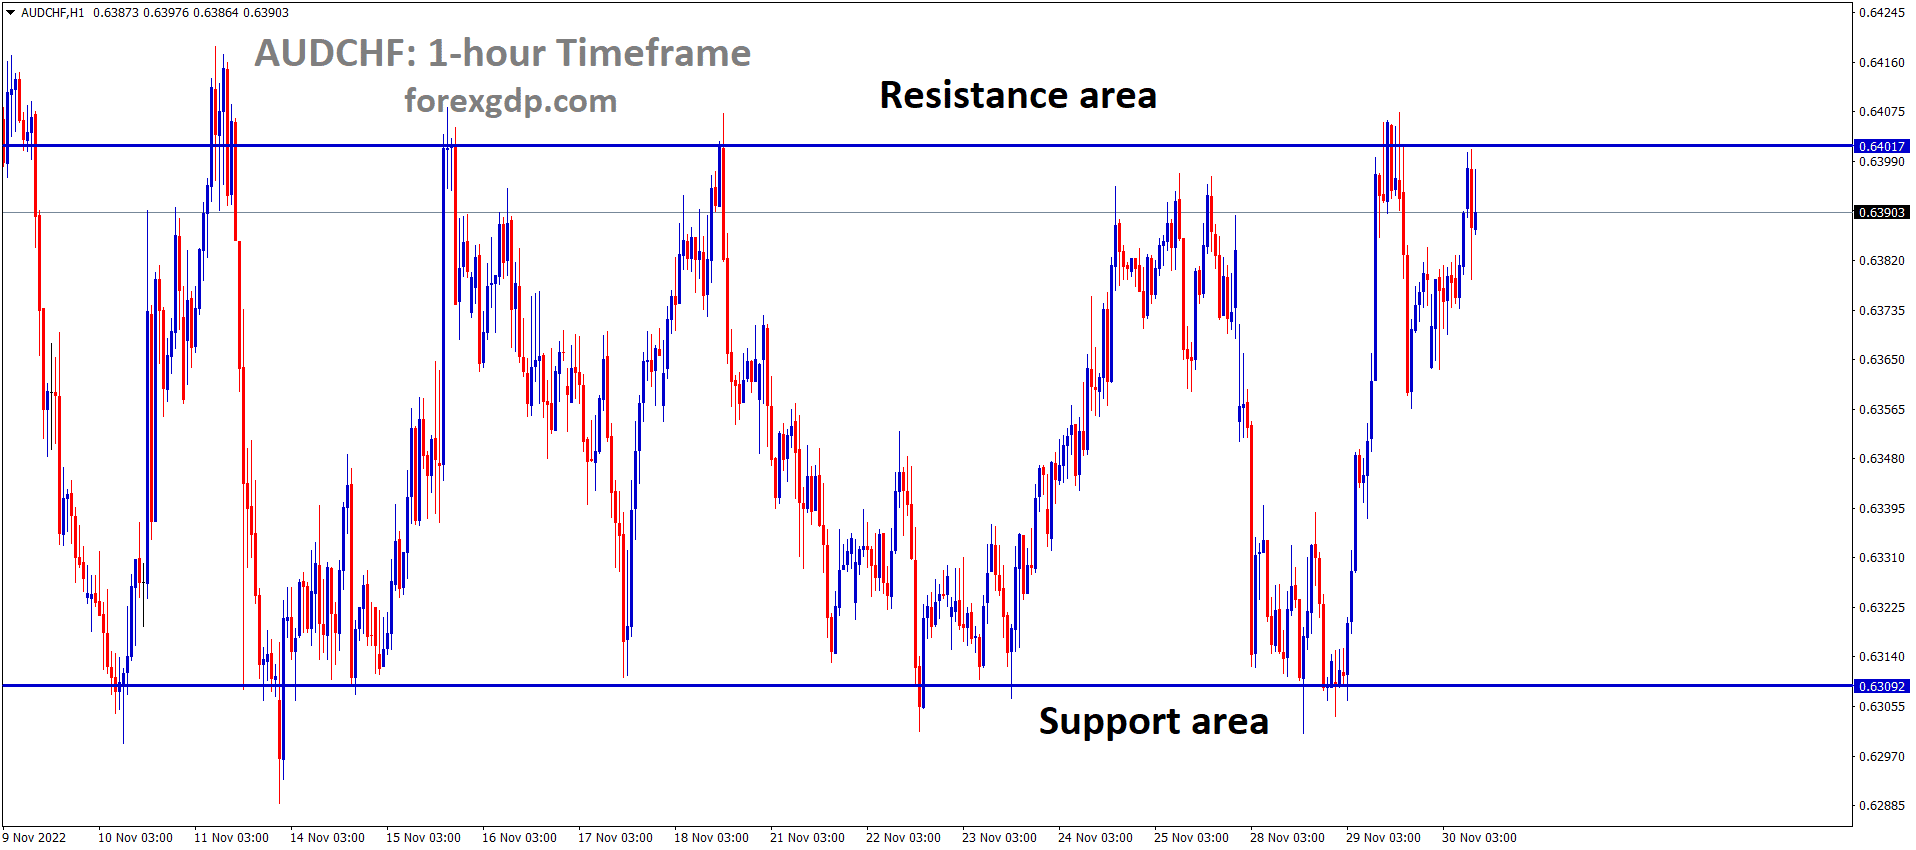 AUDCHF is moving in the Box pattern and the market has reached the resistance area of the pattern